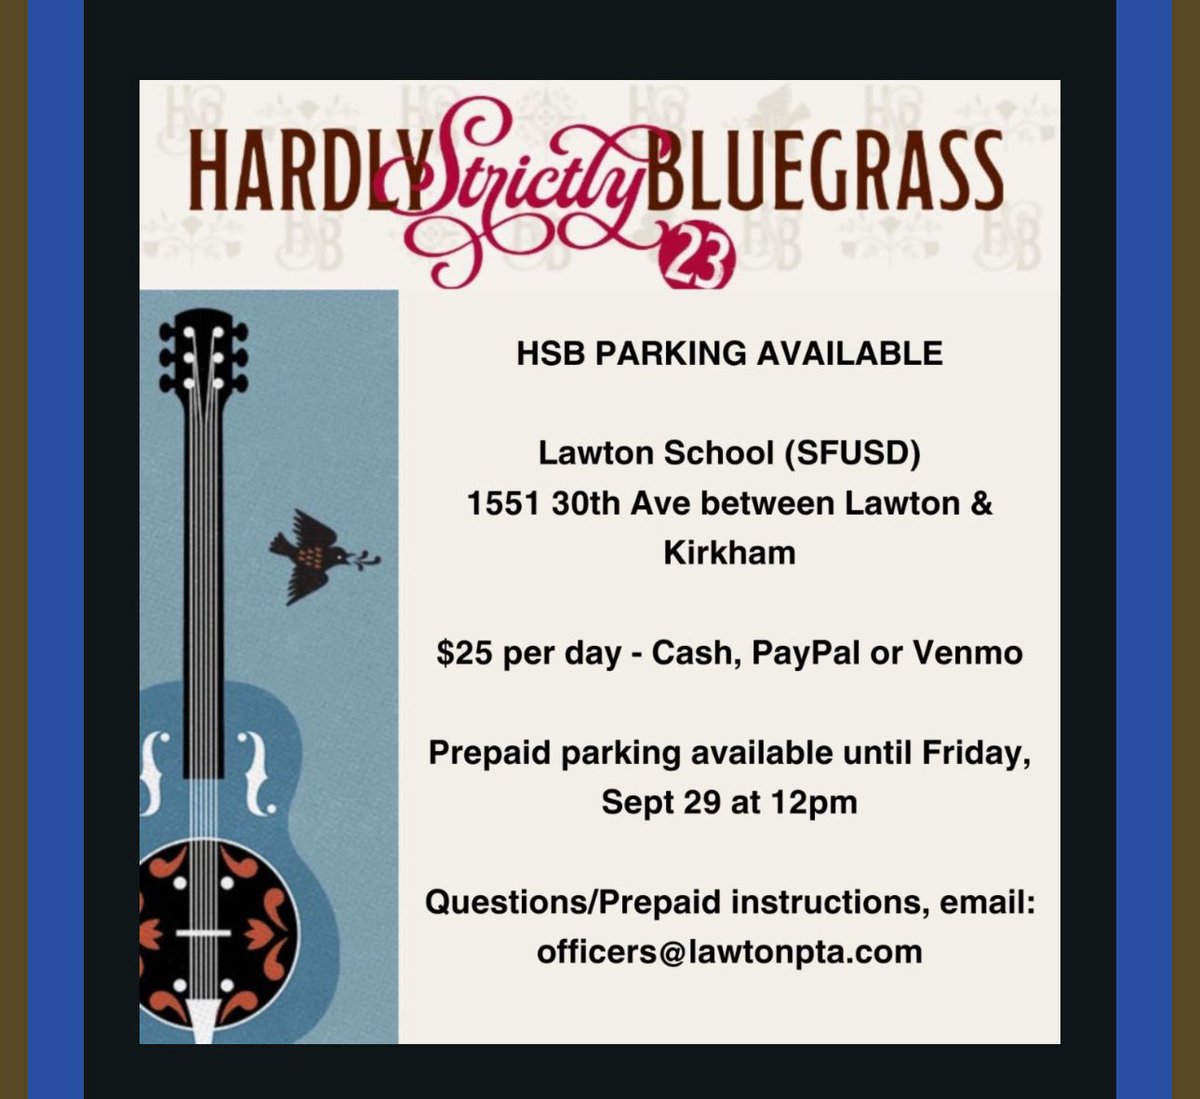 Hardly strictly bluegrass festival parking. $25 @ Lawton school. Support the school and save money. #hbs #hardlystrictlybluegrass #bluegrass #parking